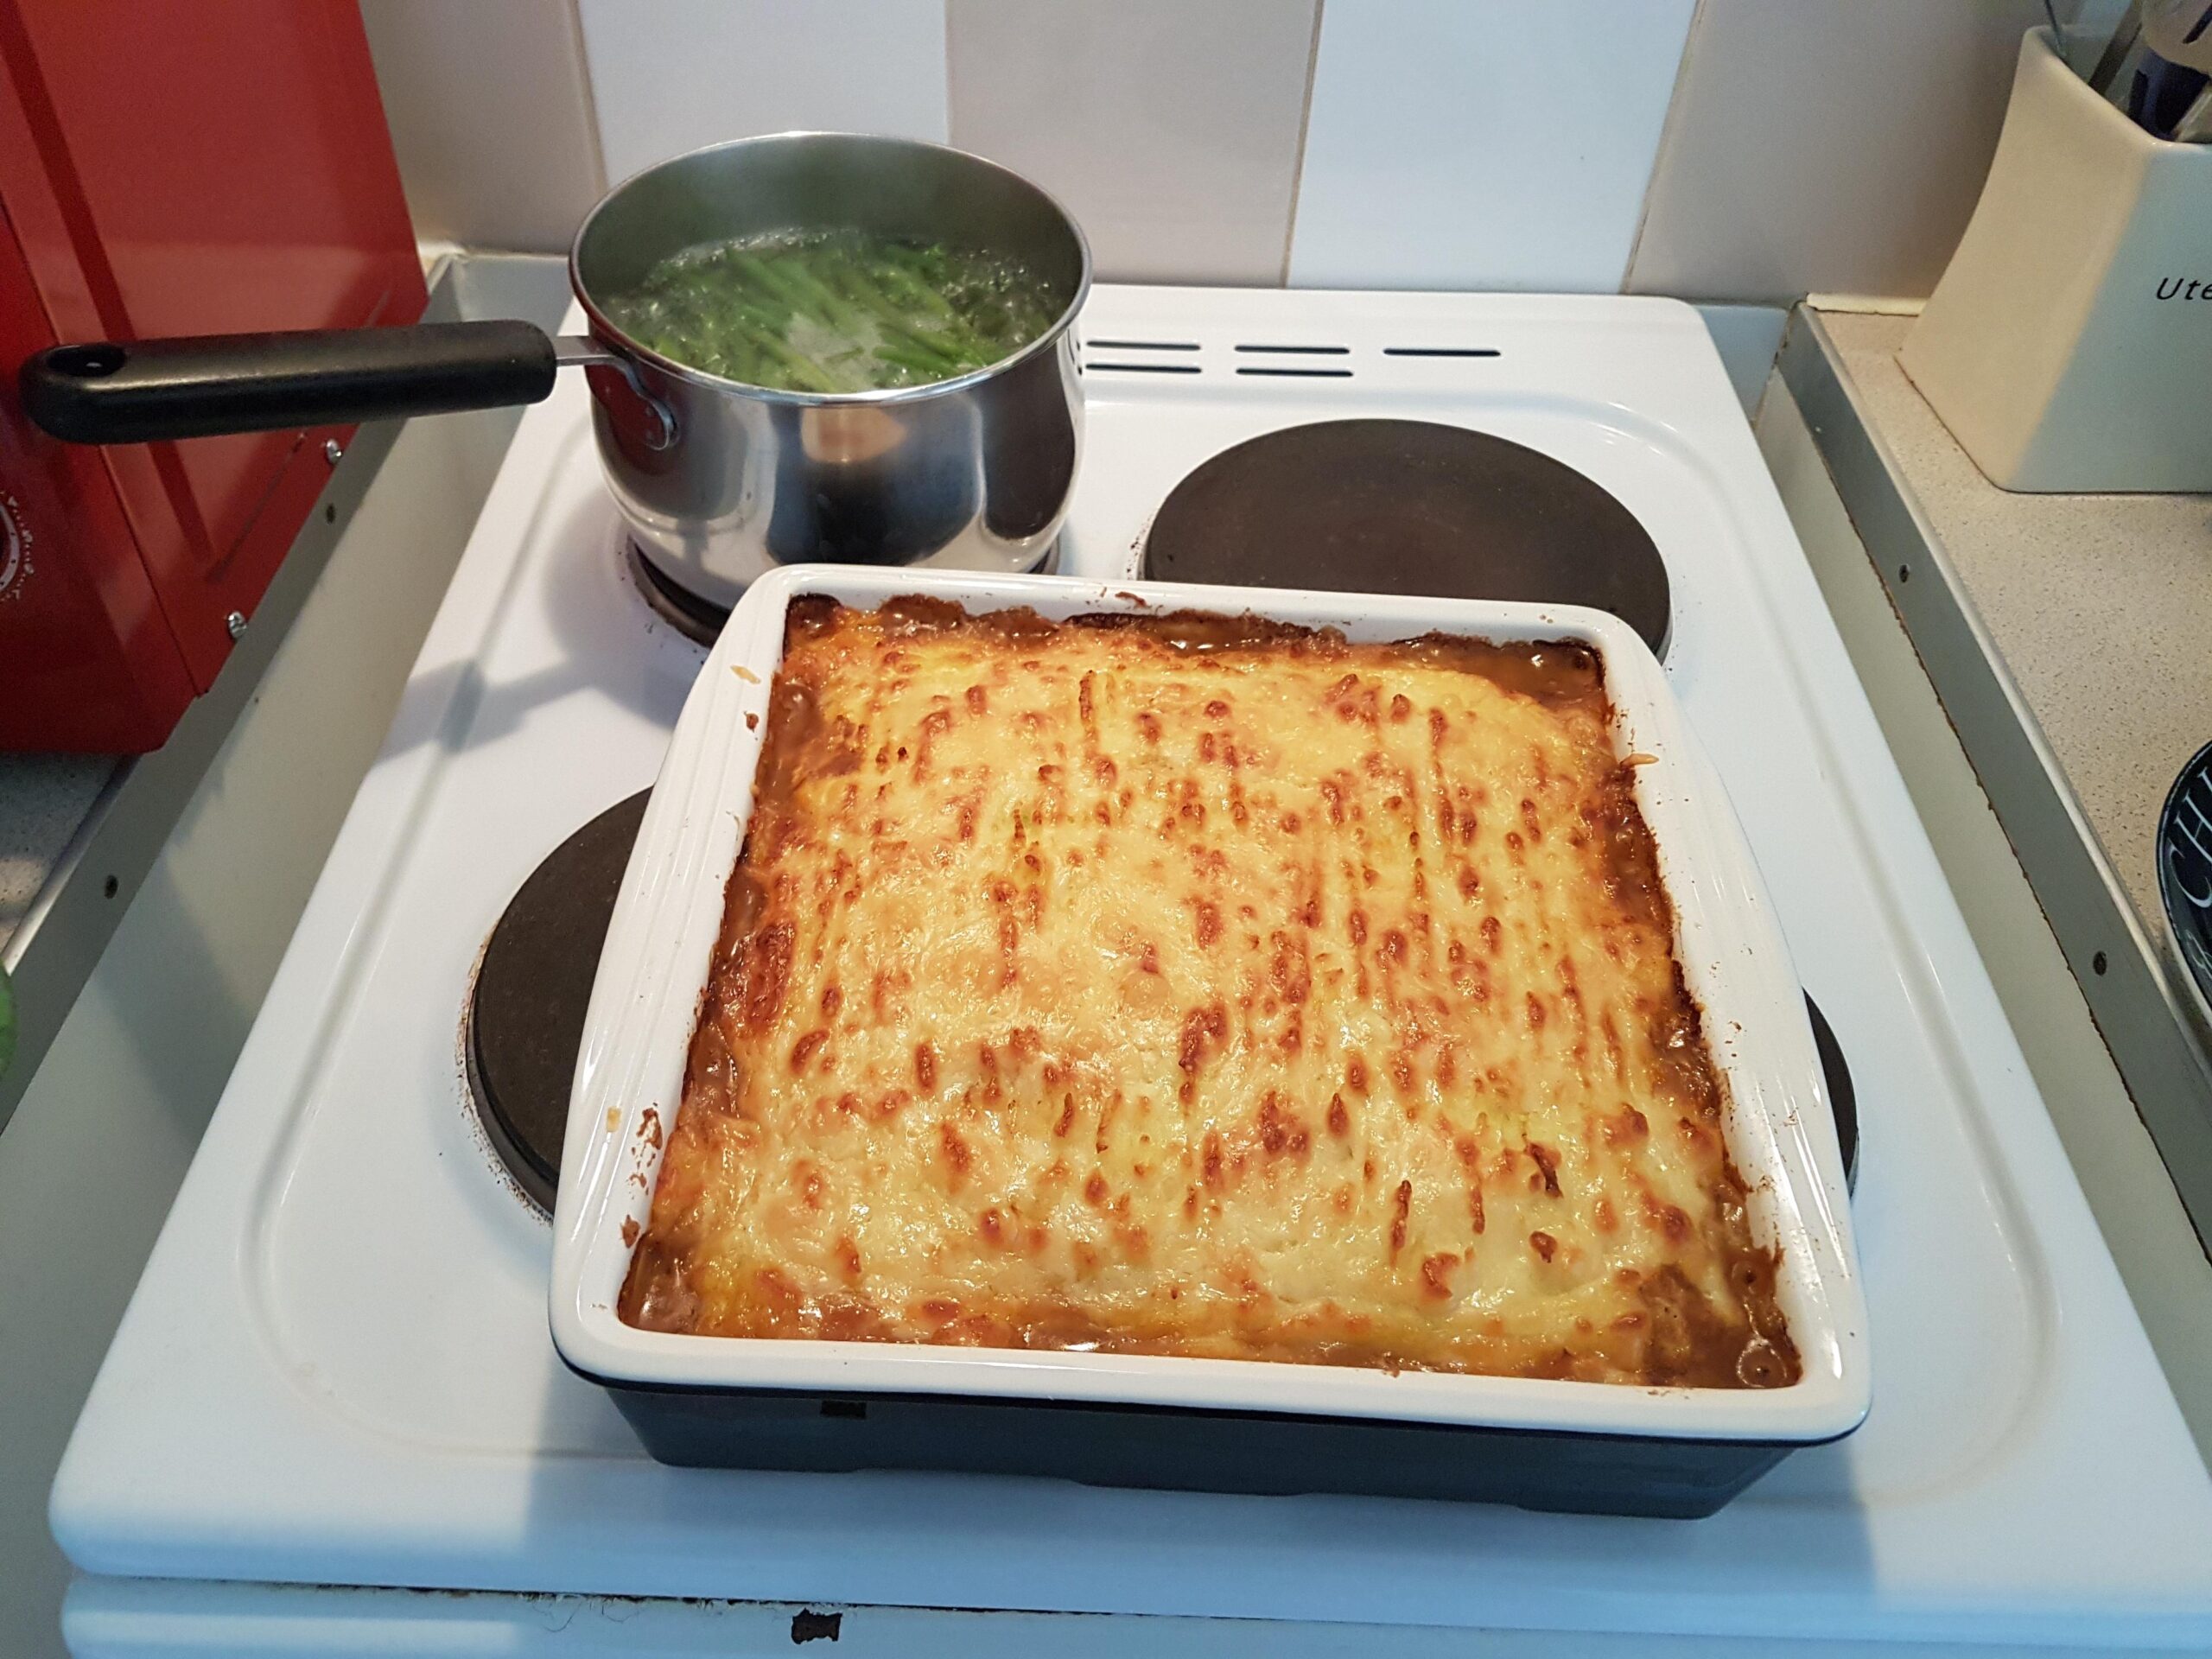  Get ready to enjoy a classic and comforting English Cottage Pie.